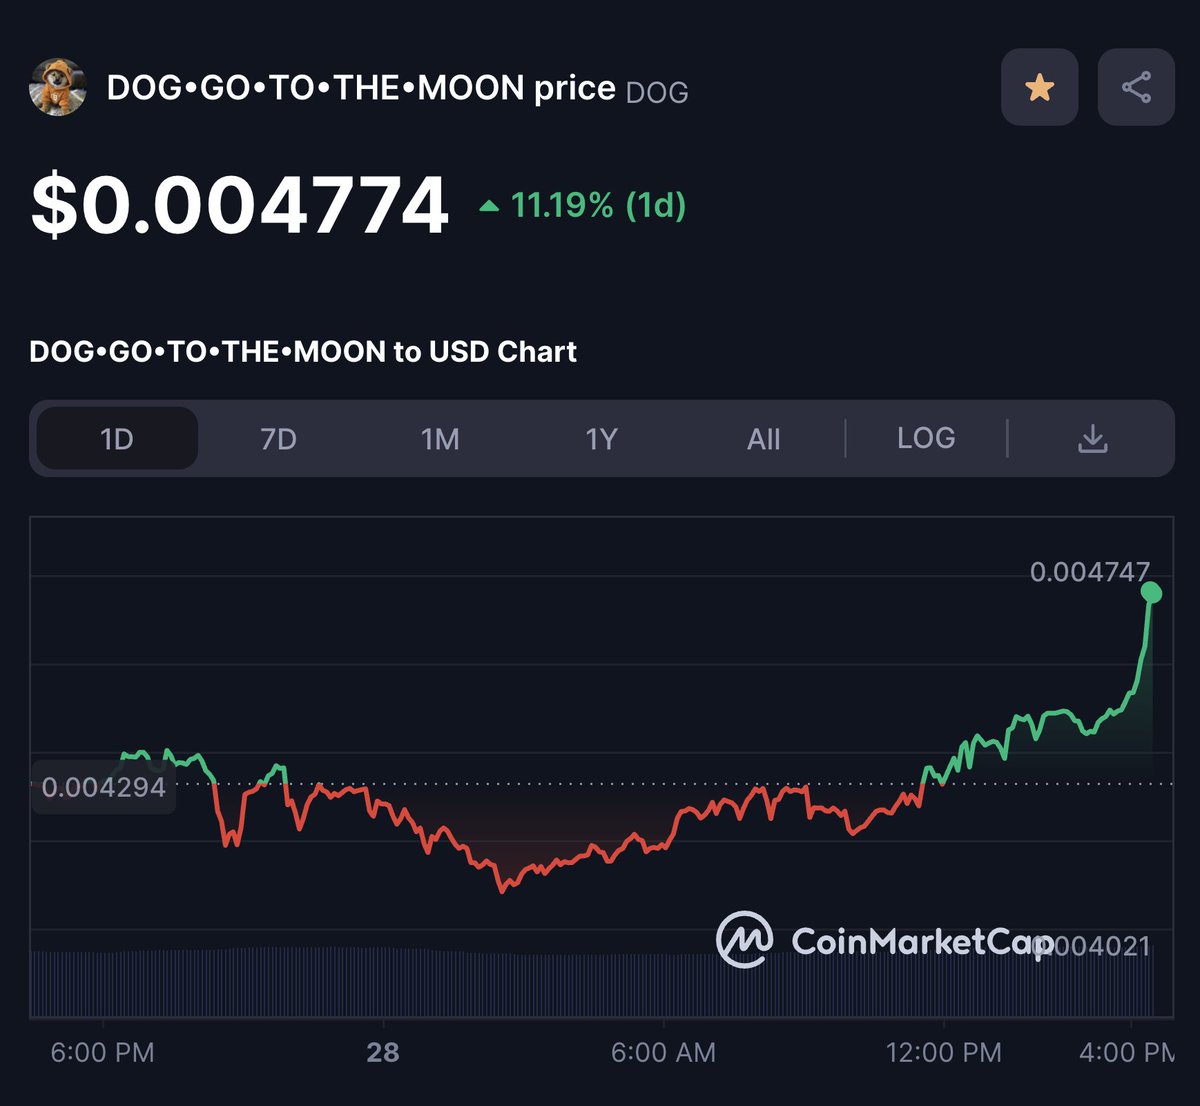 $DOG is going parabolic THIS IS NOT A DRILL